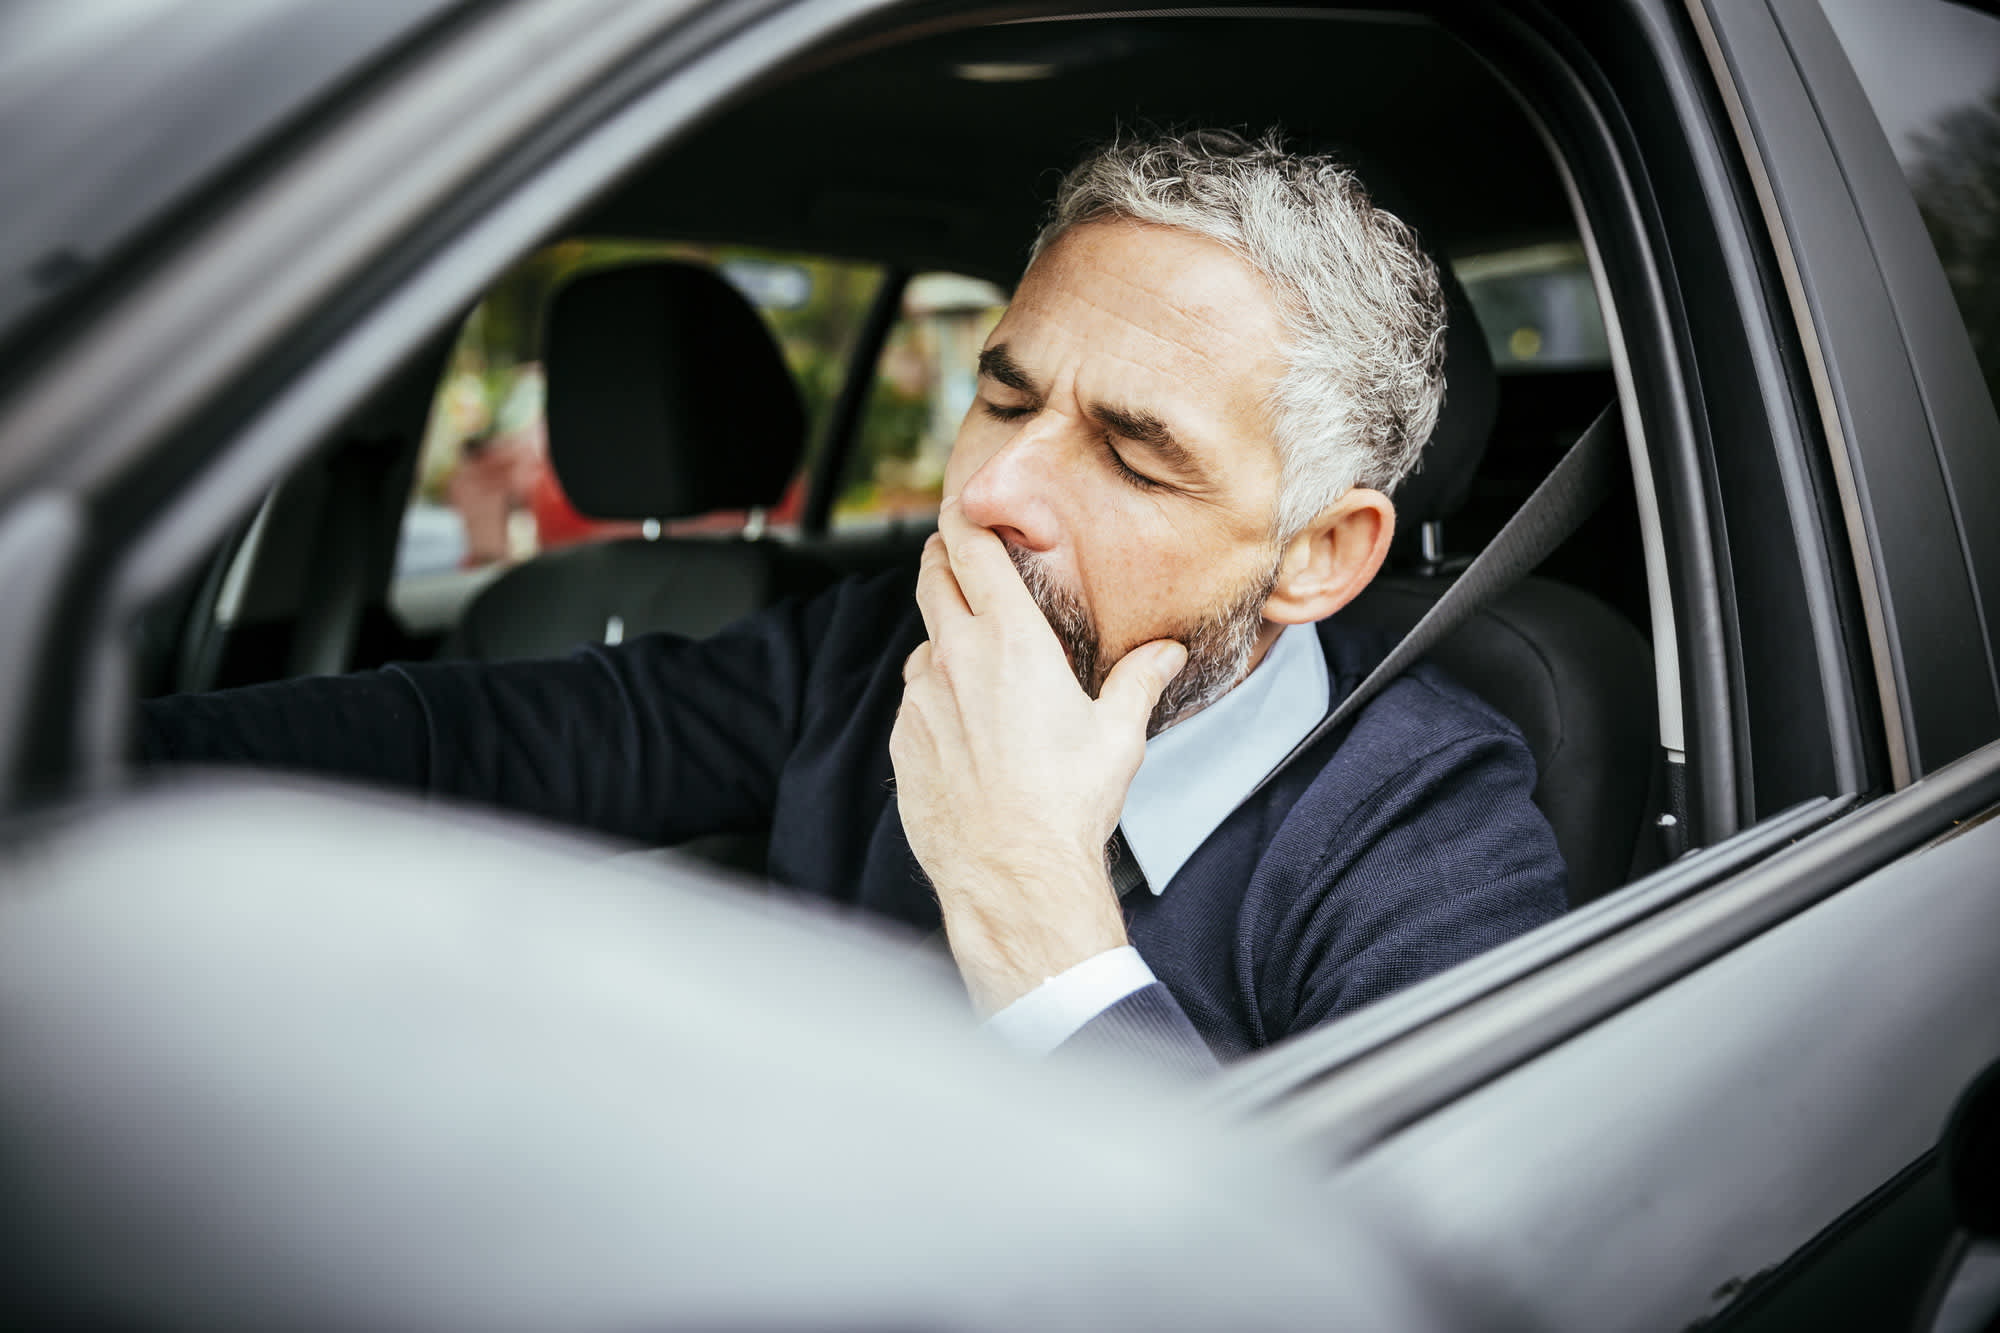 Drowsy driving may be the cause of 1 out of every 10 auto crashes